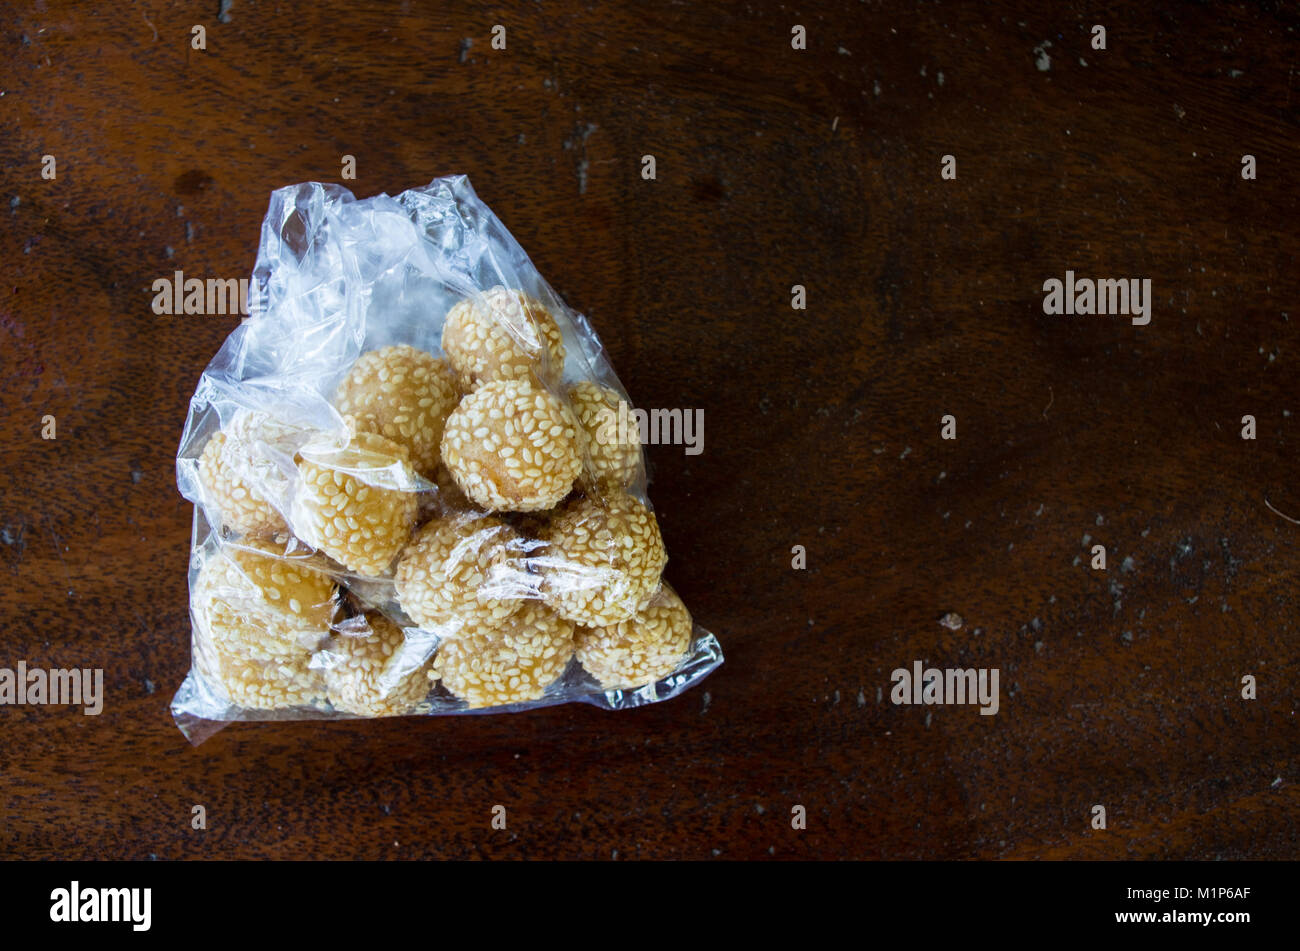 Onde-onde goreng pastry snack unopened in Indonesia with copy space right Stock Photo